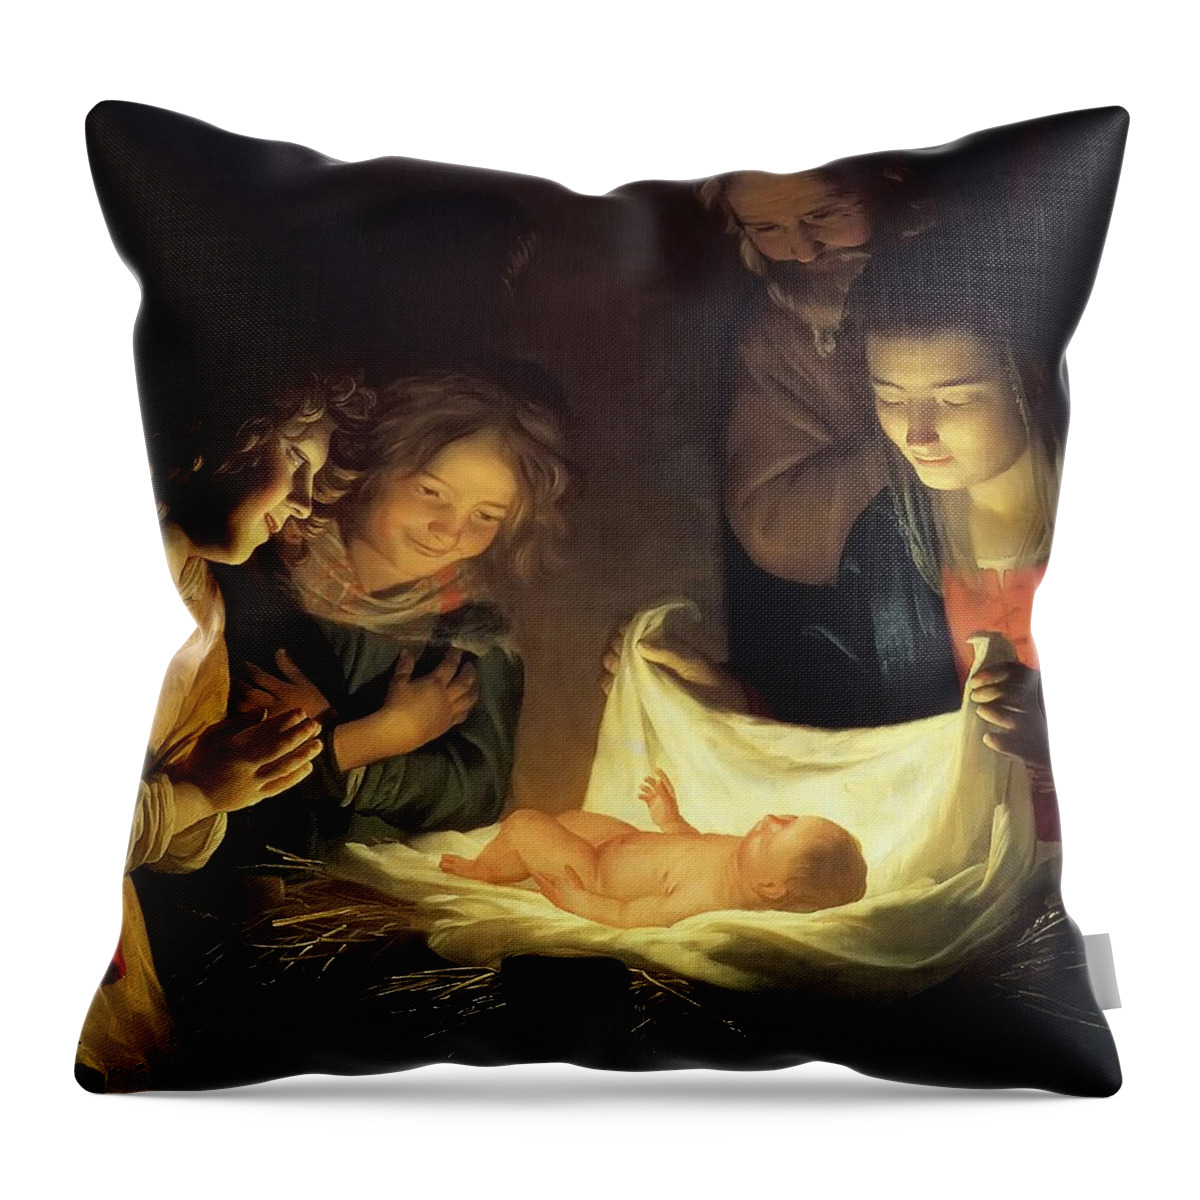 Nativity Throw Pillow featuring the painting Adoration of the Child by Gerrit van Honthorst